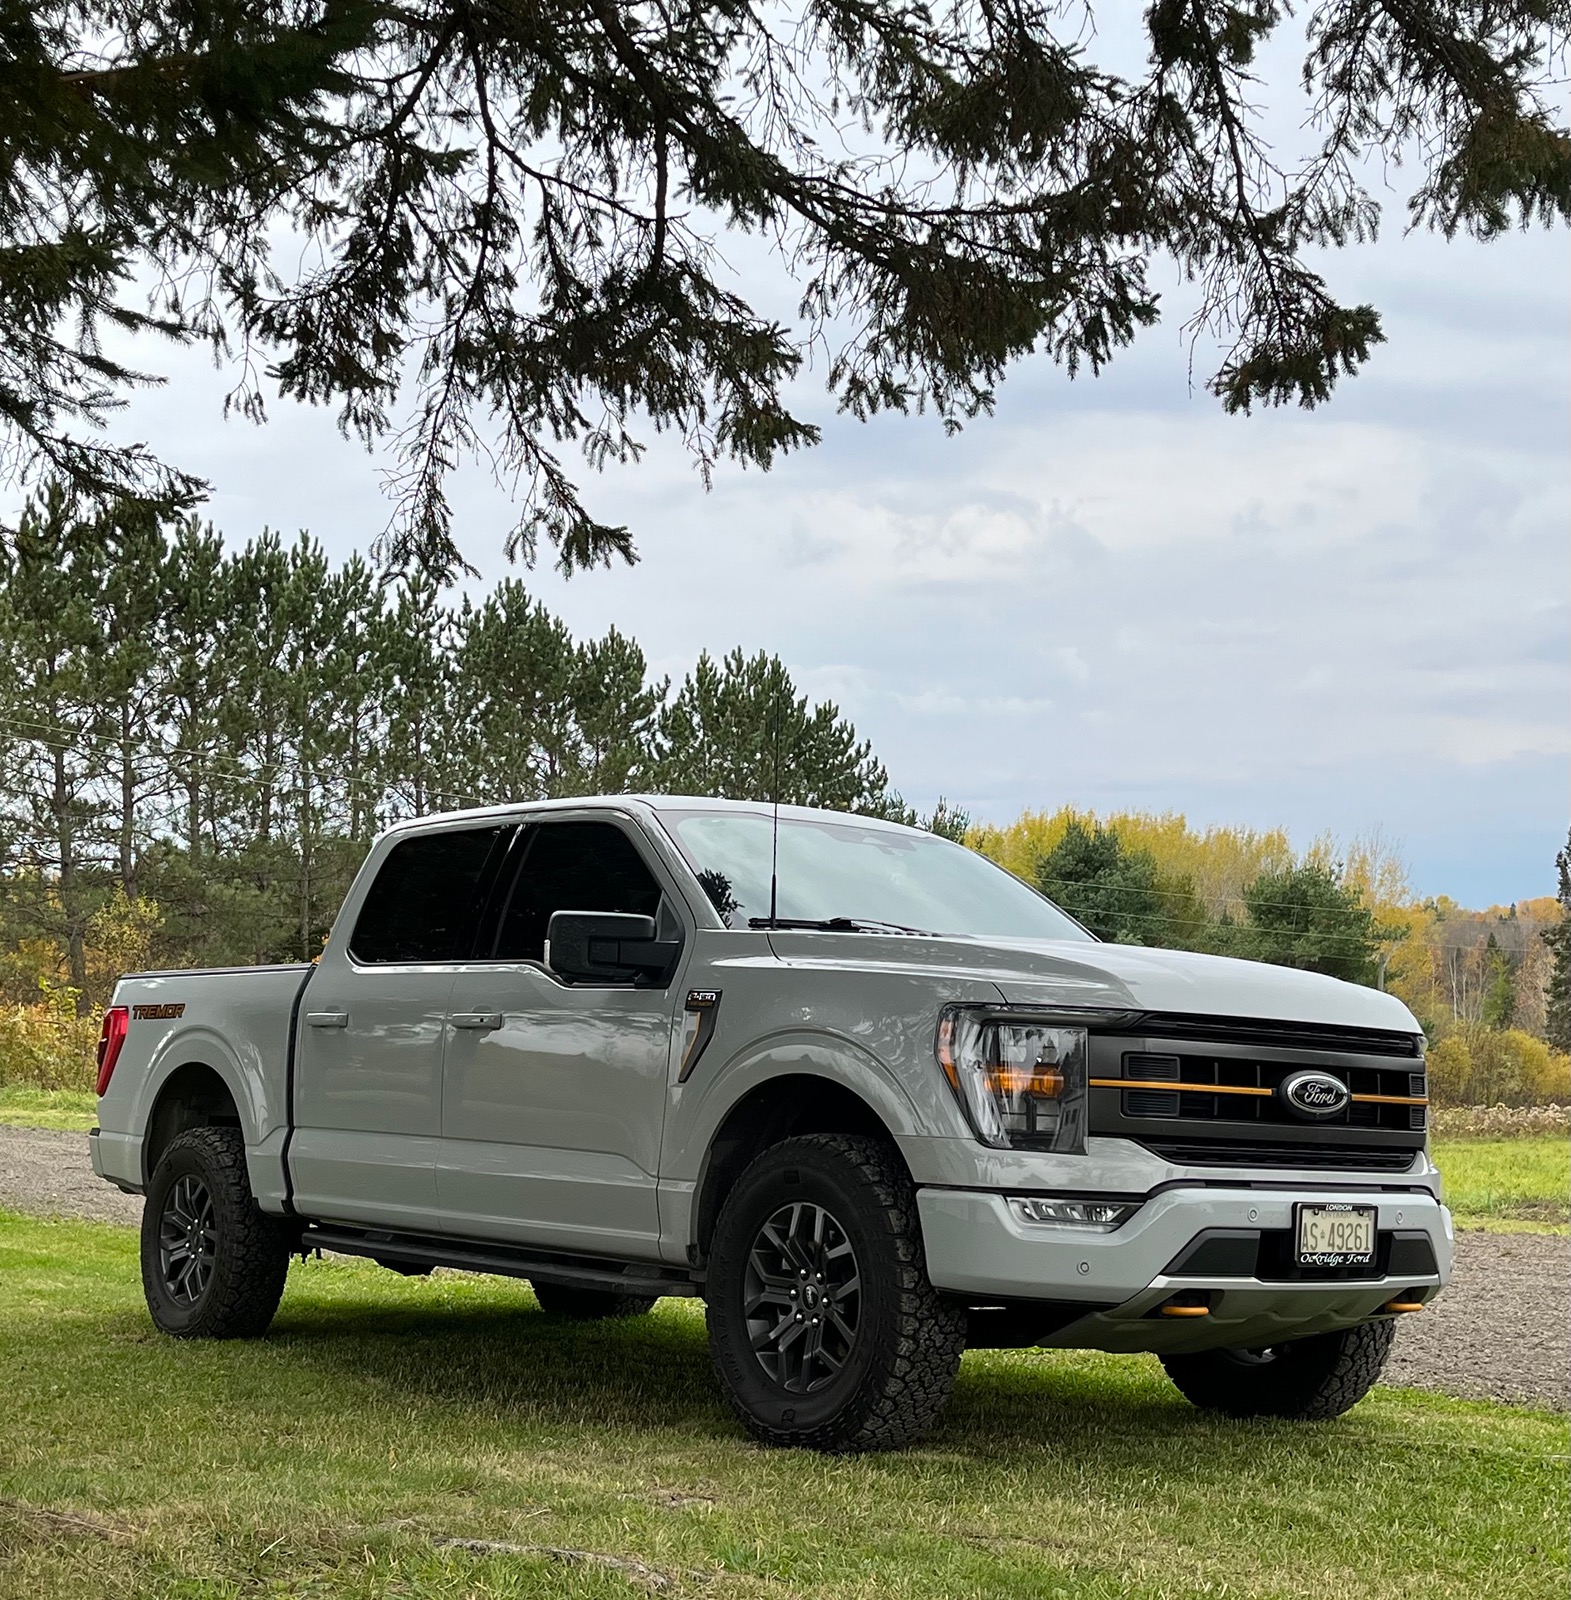 Ford F-150 Random F-150 Photos of the Day - Post Yours! 📸 🤳 1712012676593-4b